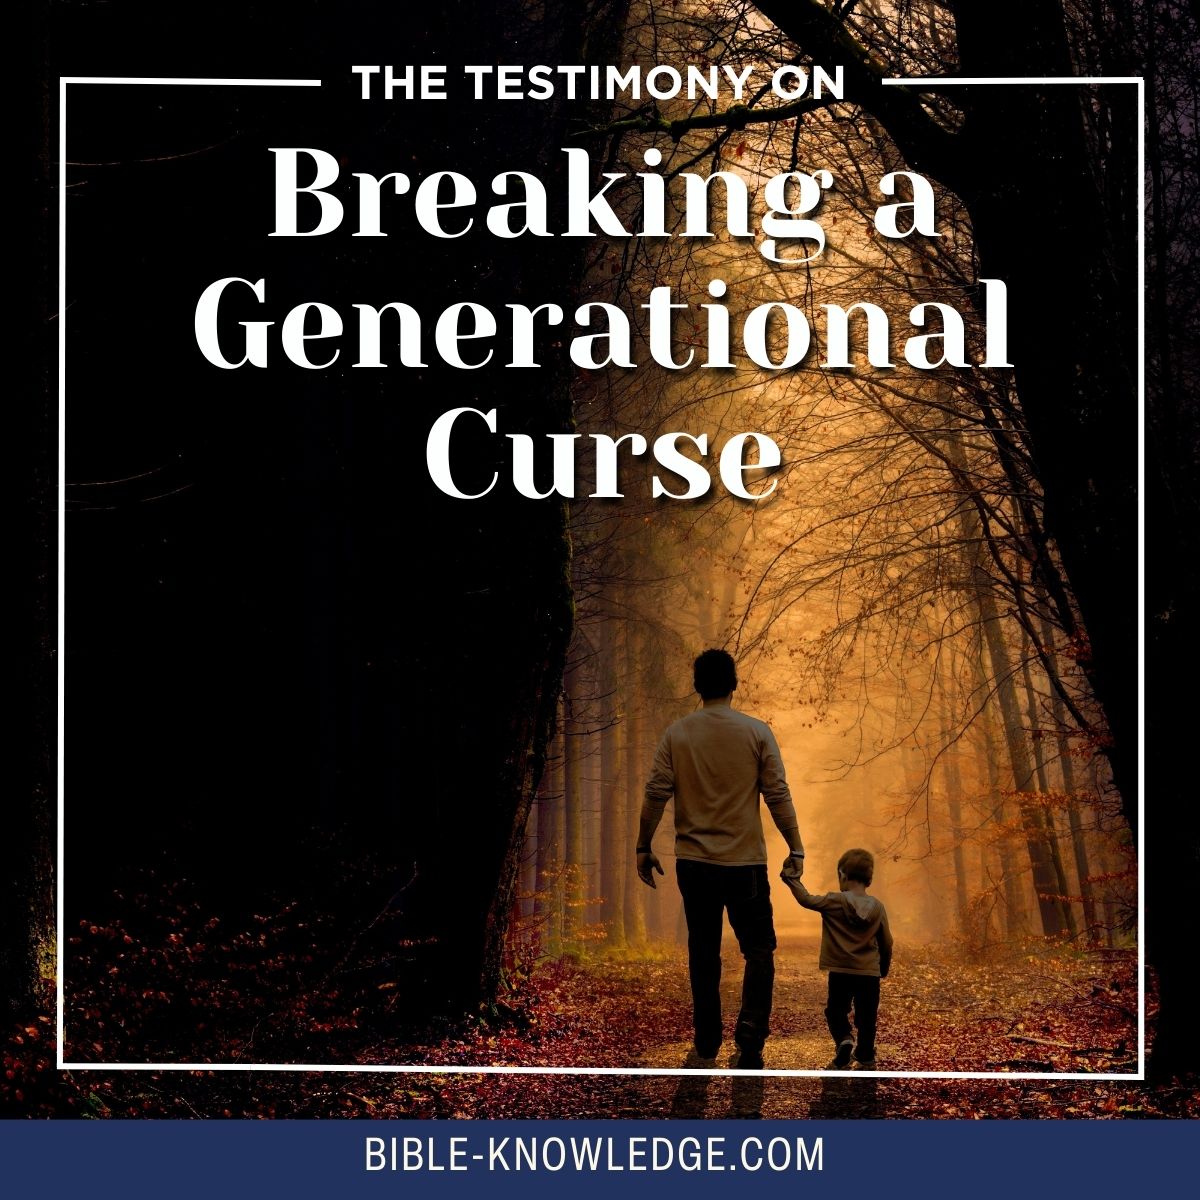 The Testimony On Breaking a Generational Curse